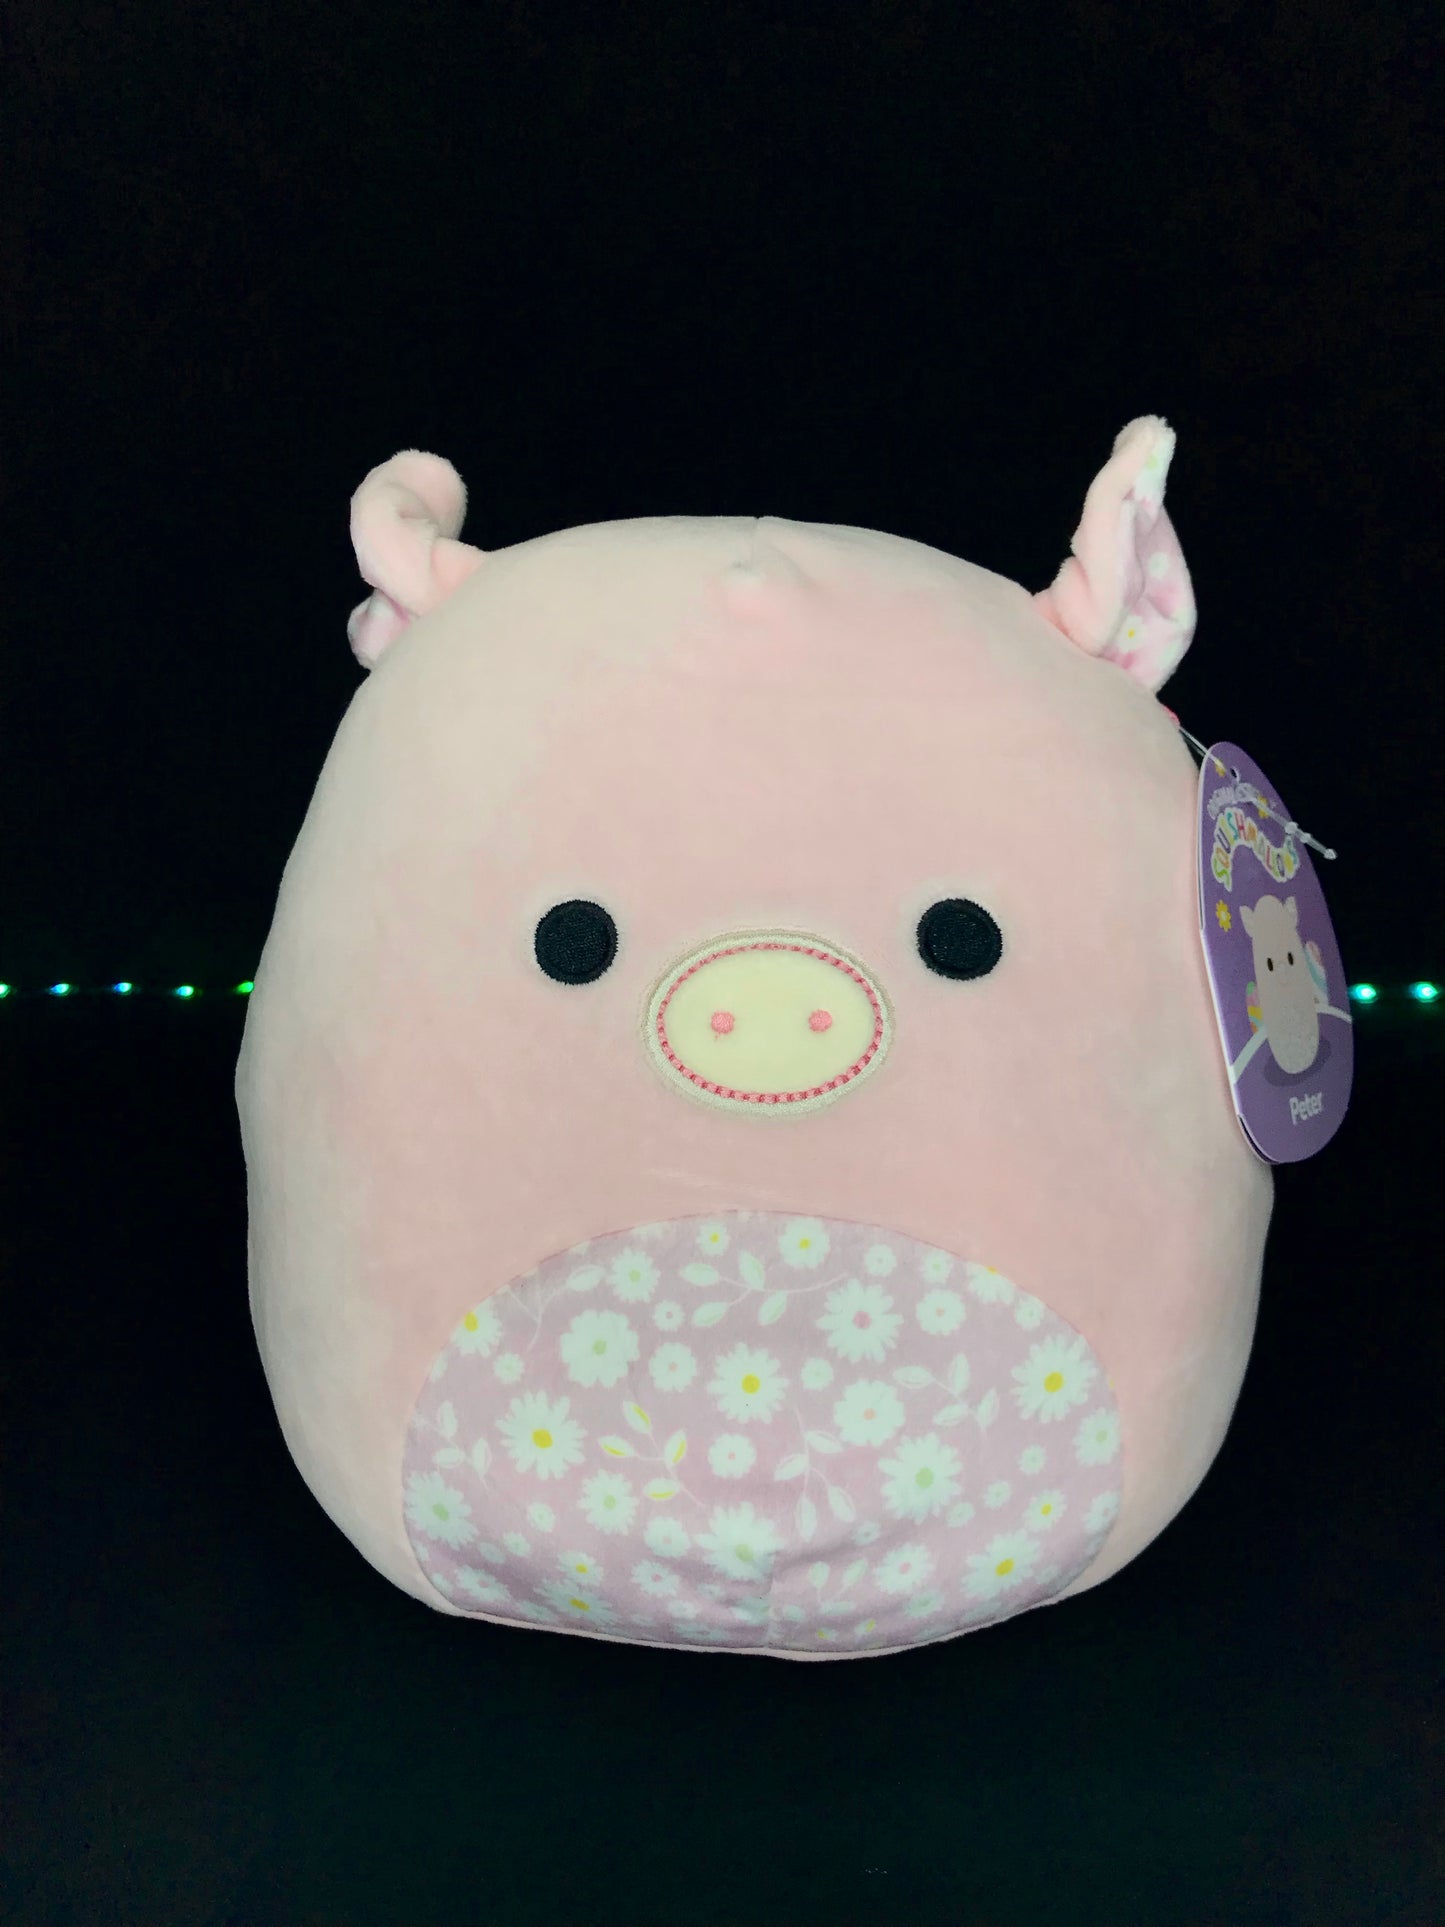 Squishmallow Peter the Spring Pig